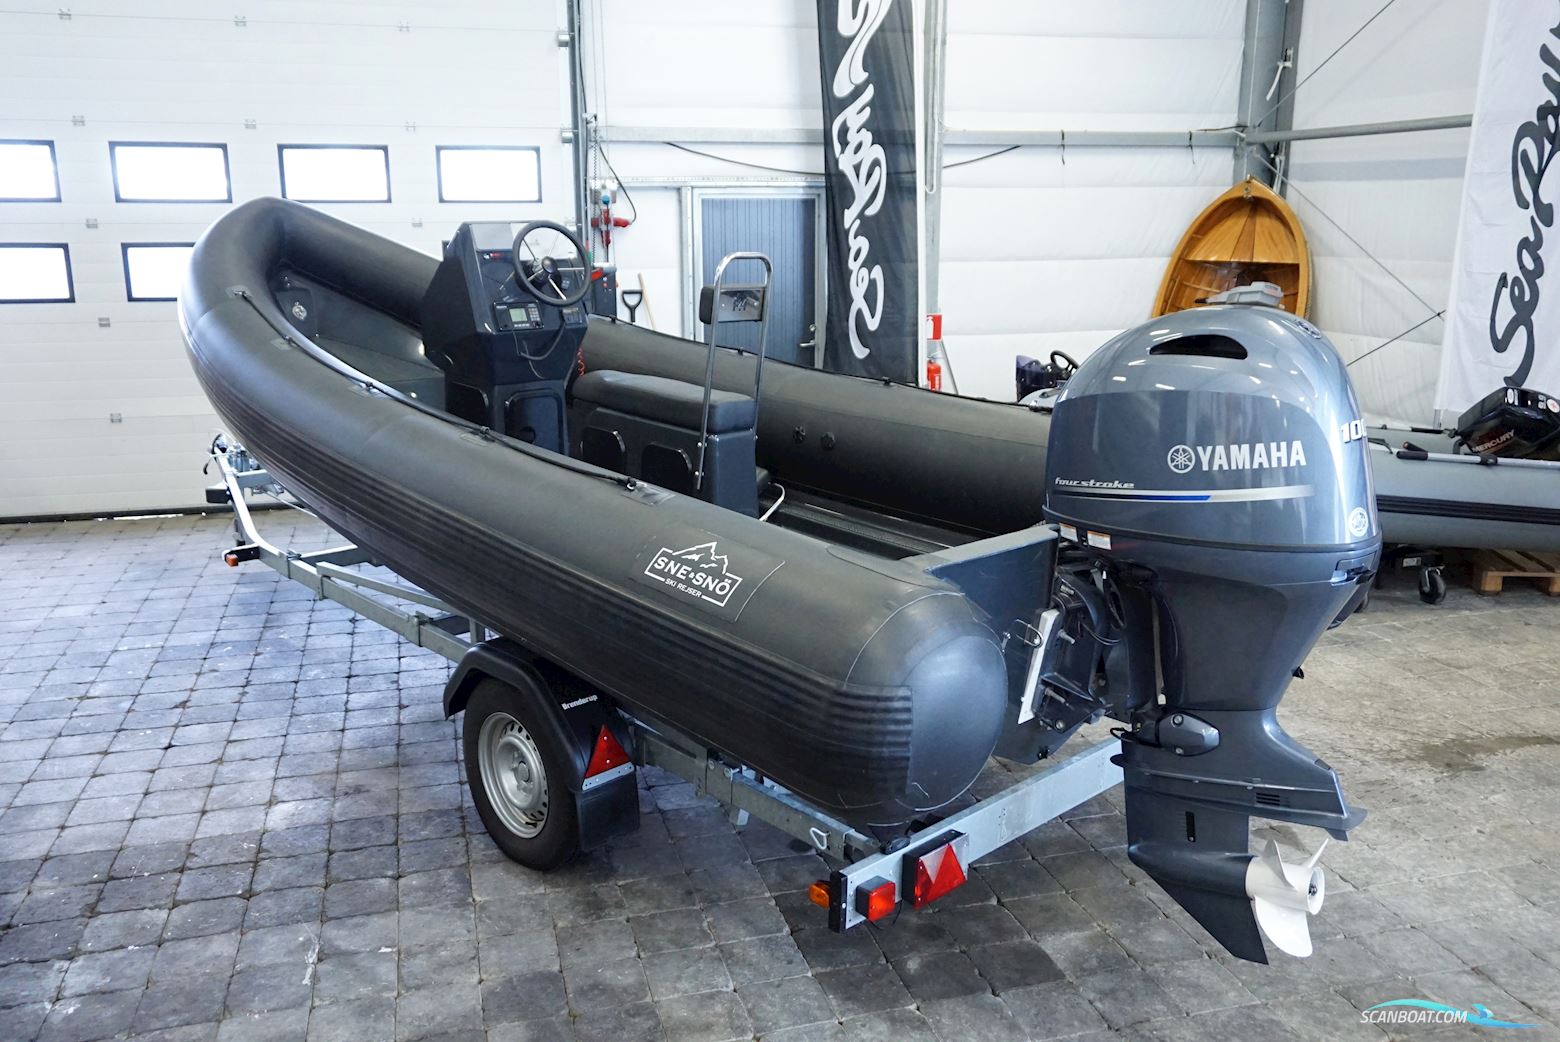 H-14 Performance AX 560 Inflatable / Rib 2020, with Yamaha F100Fetl -2020 engine, Sweden